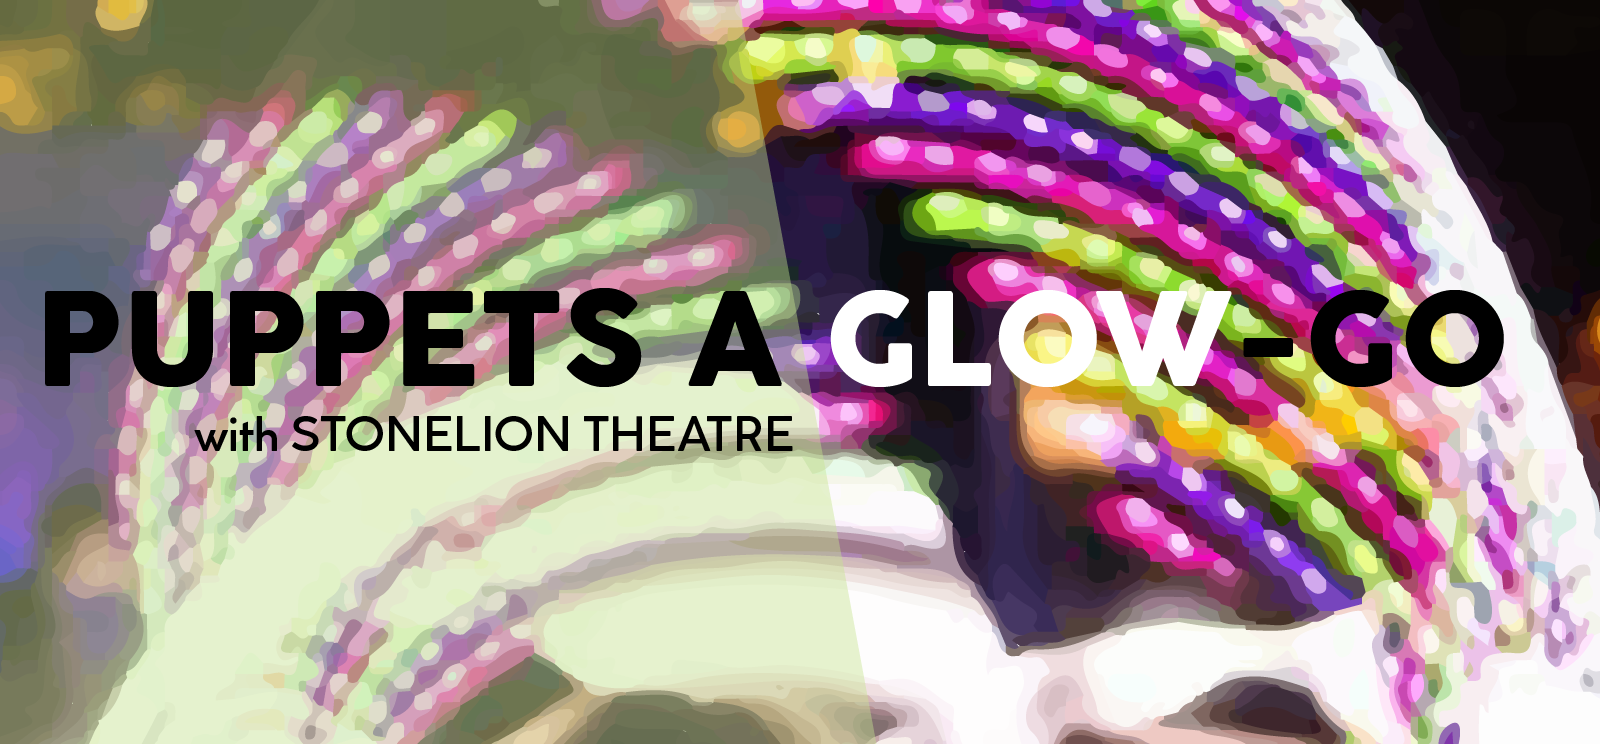 Image: Abstract colored cights in hoop patterns. Text: Puppets a Glow-Go / with StoneLion Theatre